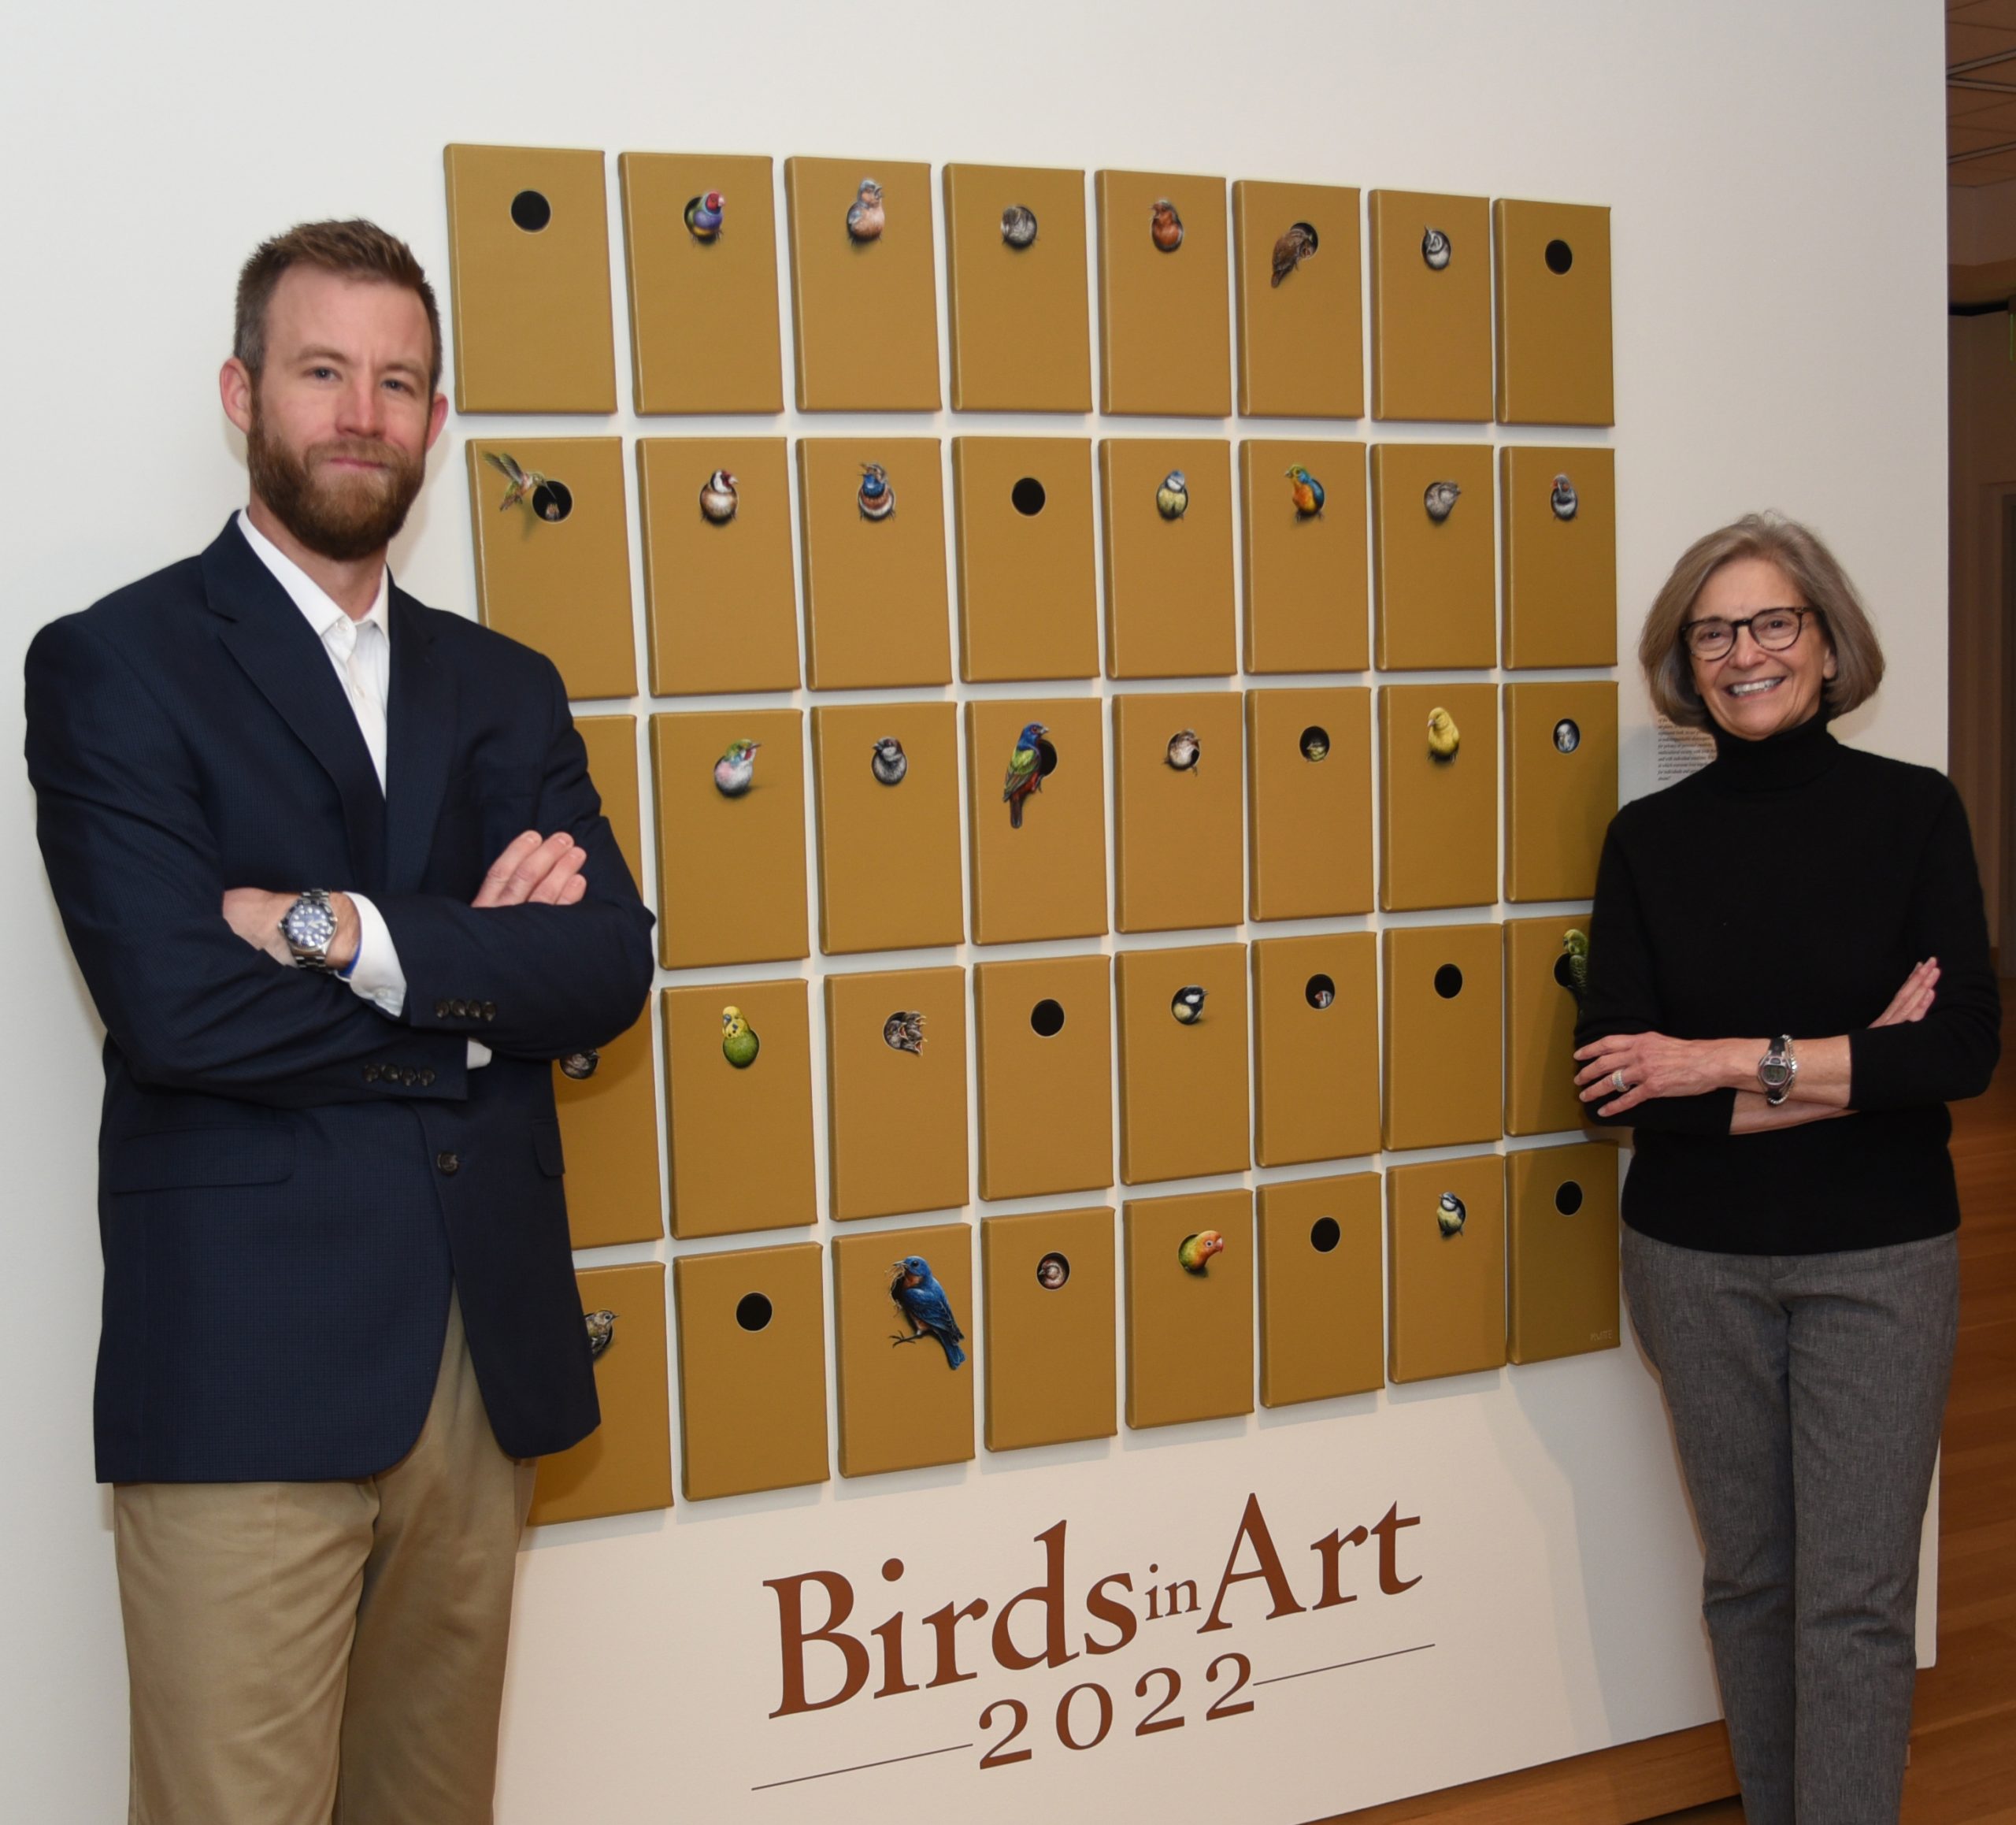 Matt Foss and Kathy Foley at the Leigh Yawkey Woodson Art Museum in the "Birds in Art" 2022 gallery